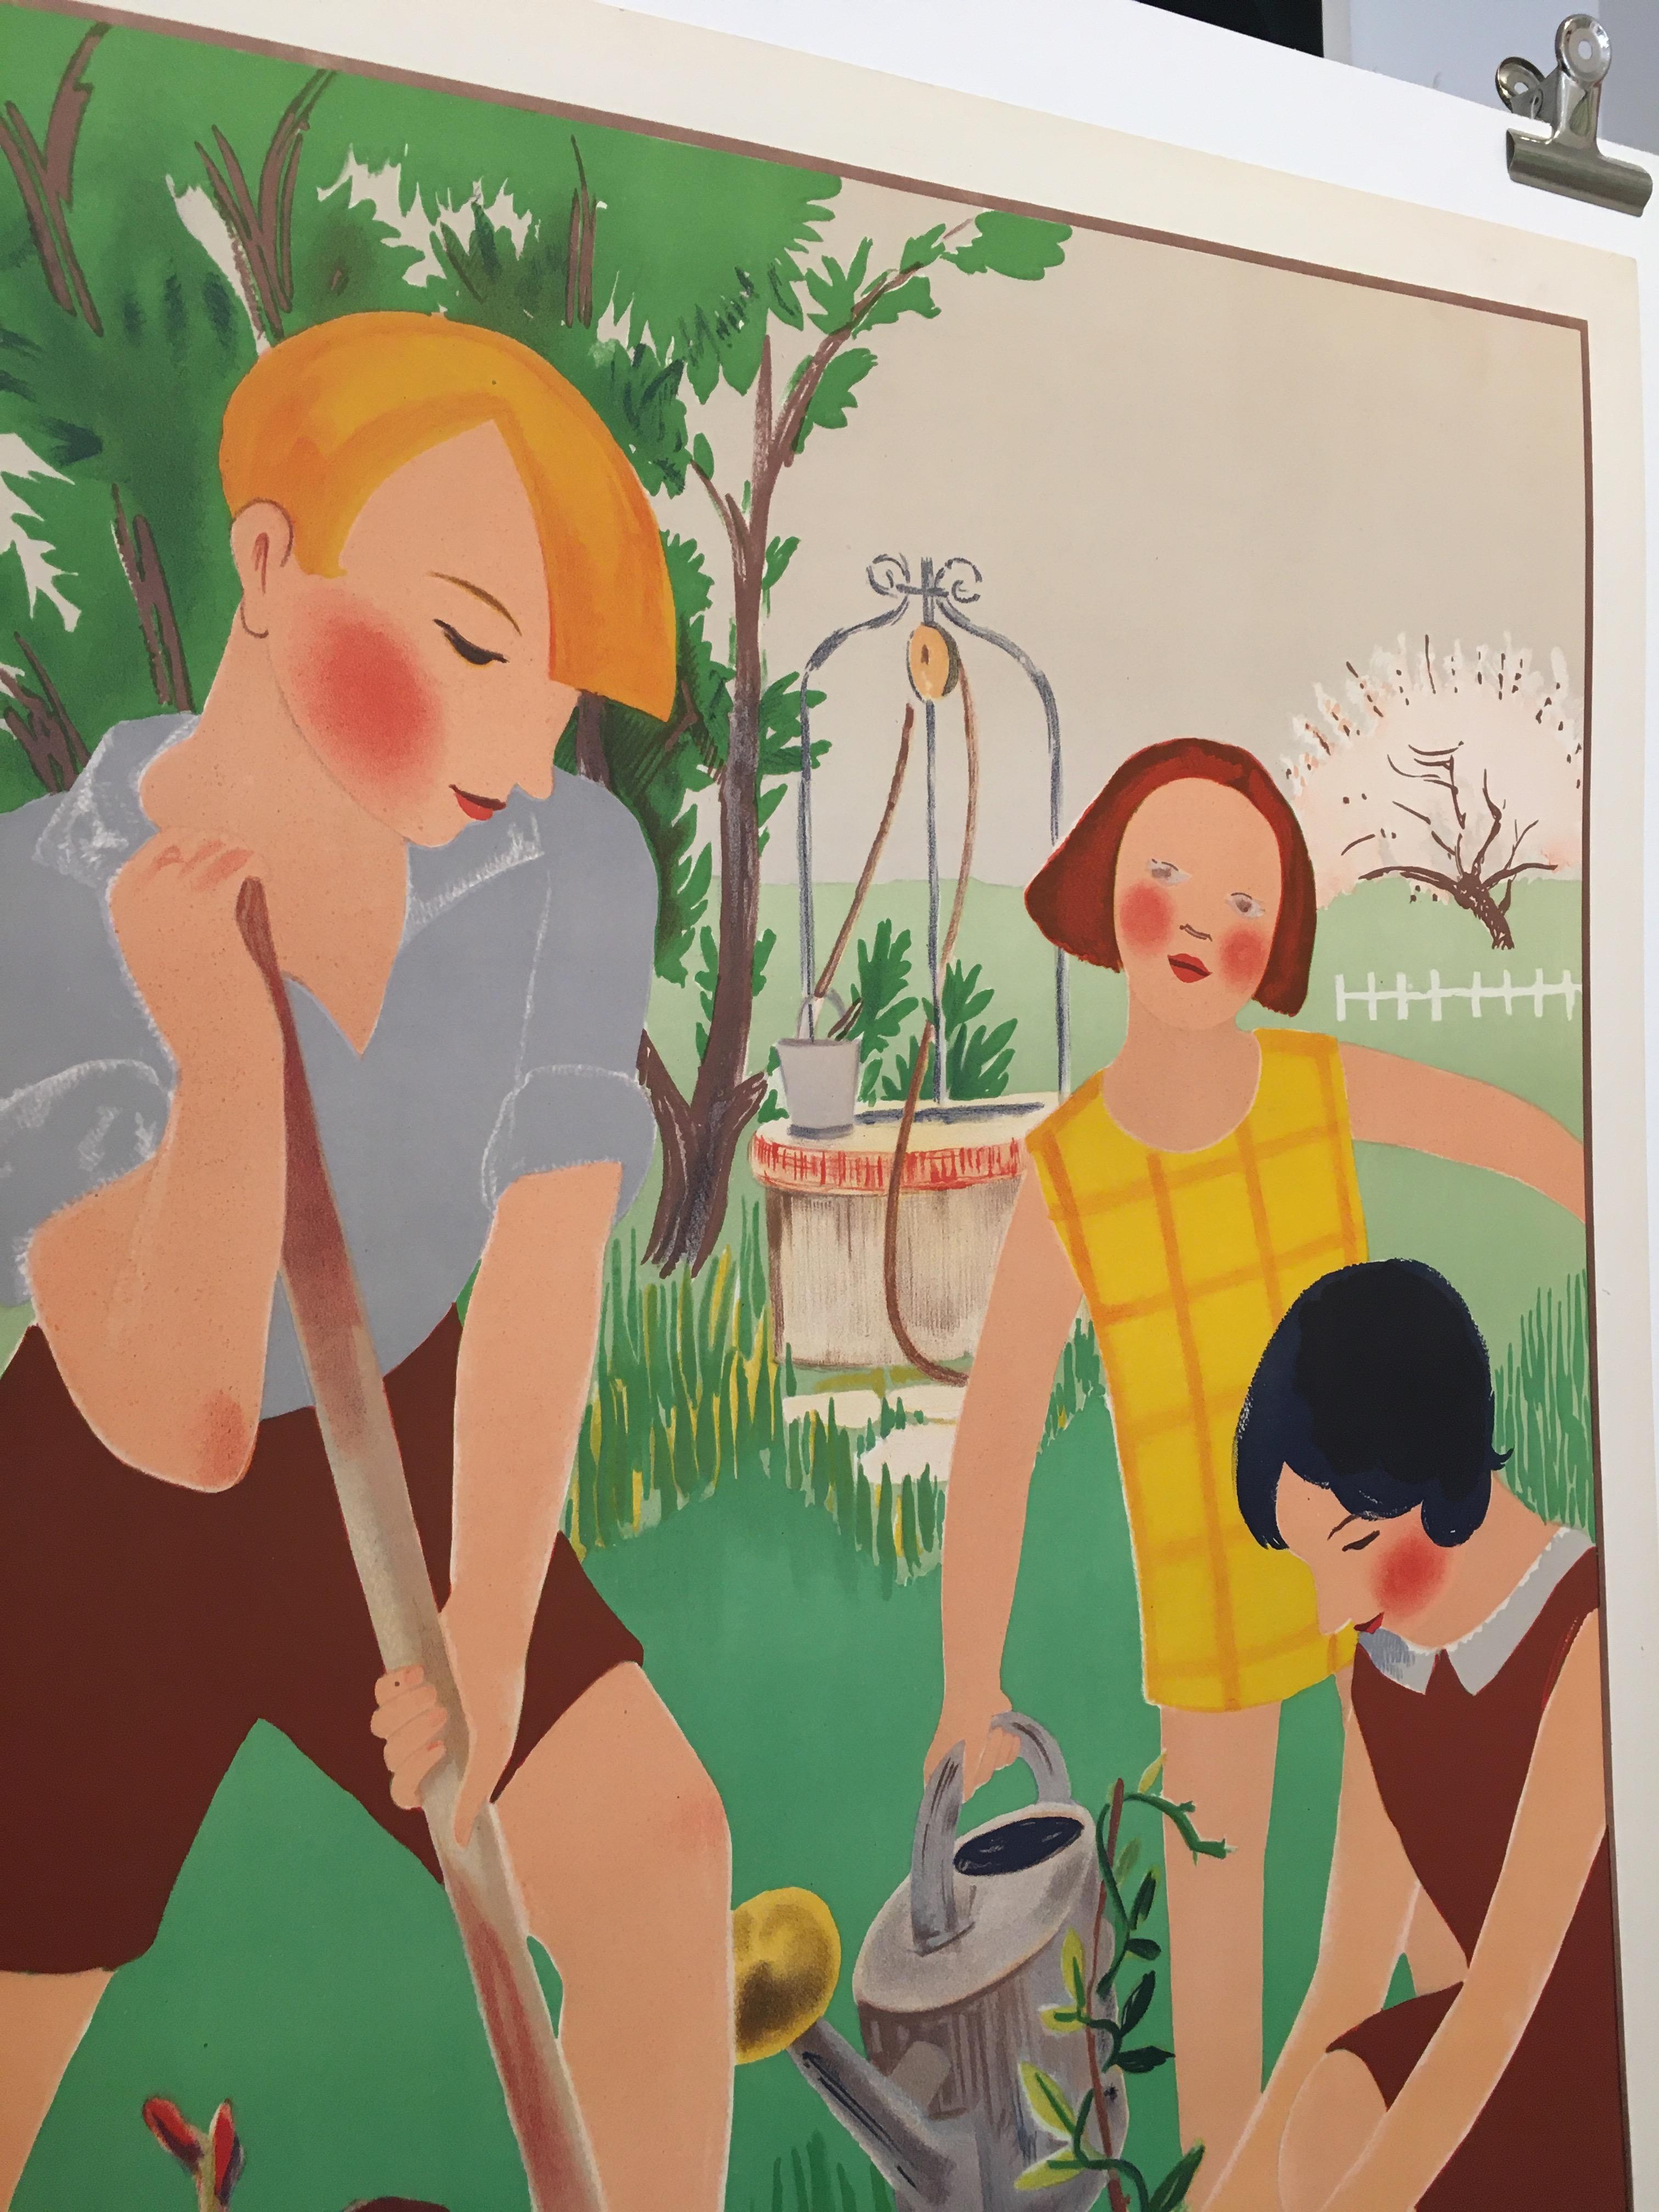 Original vintage Art Deco Gardening Poster, 'L’ Art L’Ecole', 1931 by R. Rochette

Original Art Deco poster featuring children gardening. This poster was designed by R. Rochette, the poster itself is in good condition and has been linen backed for